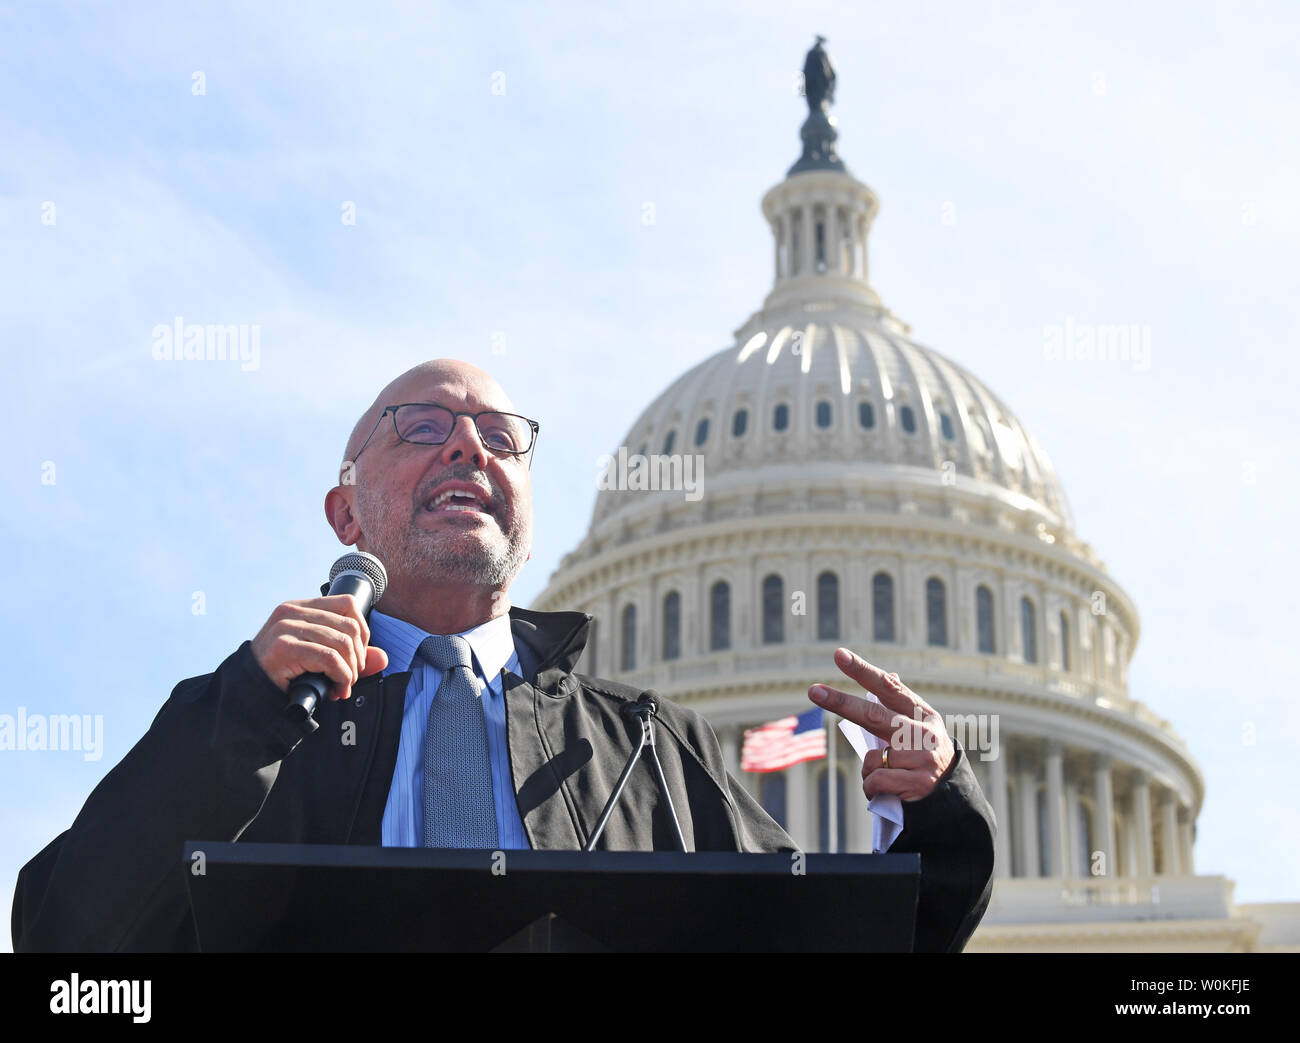 Congressman Ted Deutch (D-FL), the representative from the district in Florida where the Stoneman Douglas High School shooting occurred, speaks at a rally in front of the Capitol in Washington, DC on March 14, 2019. Students from  the Washington, DC area  rallied at the White House and marched to the Capitol in protest of gun violence.               Photo by Pat Benic/UPI Stock Photo